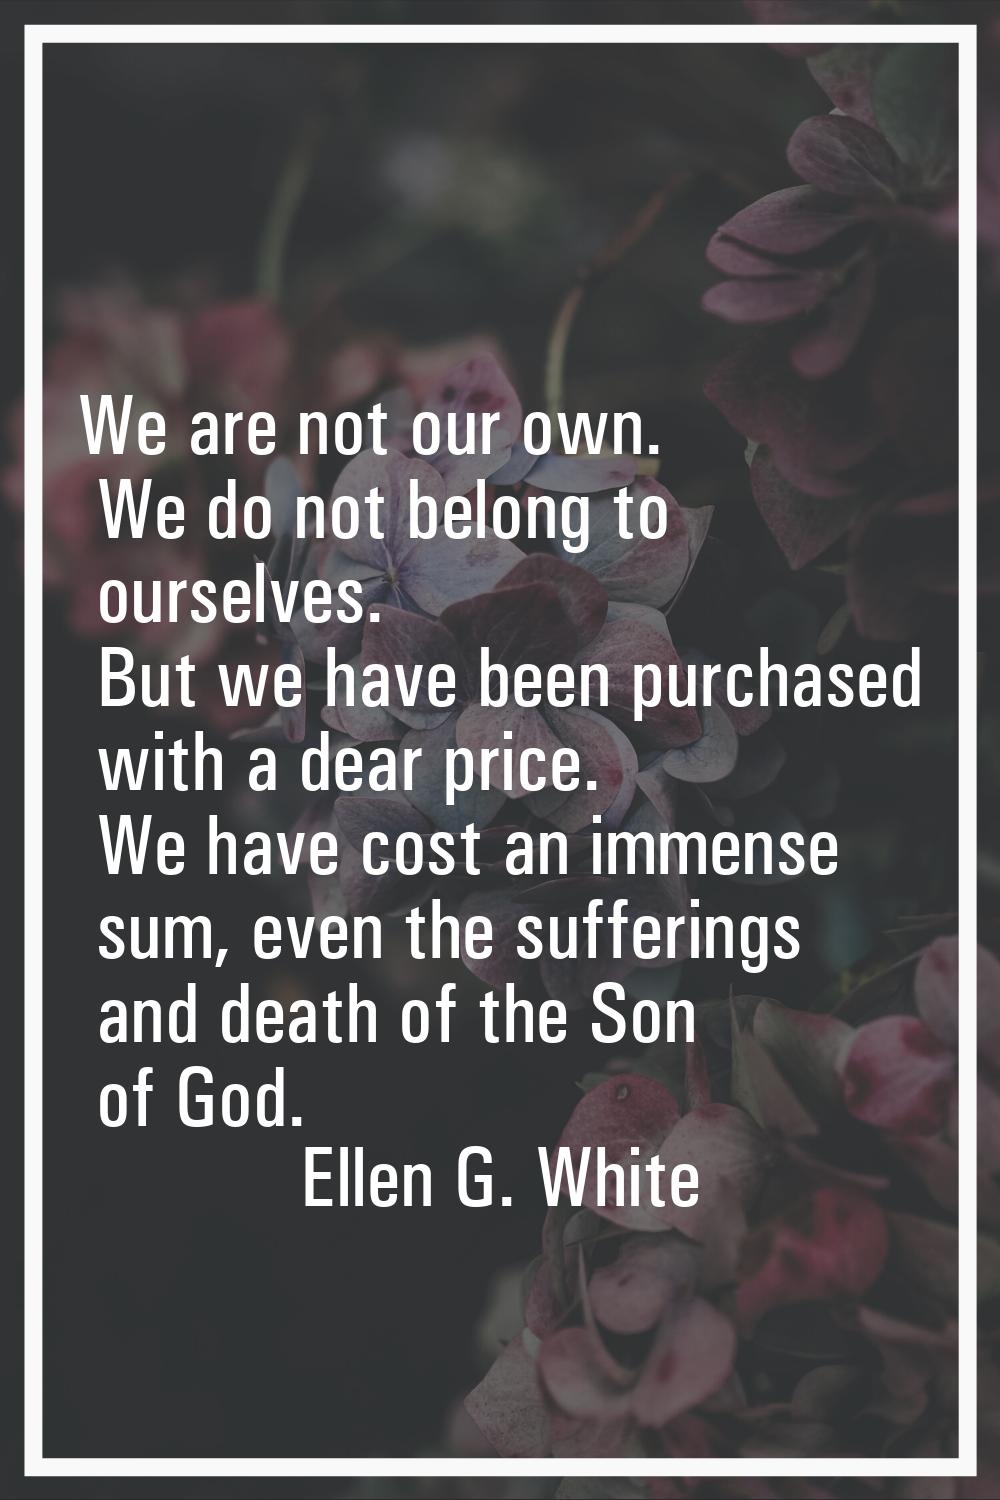 We are not our own. We do not belong to ourselves. But we have been purchased with a dear price. We